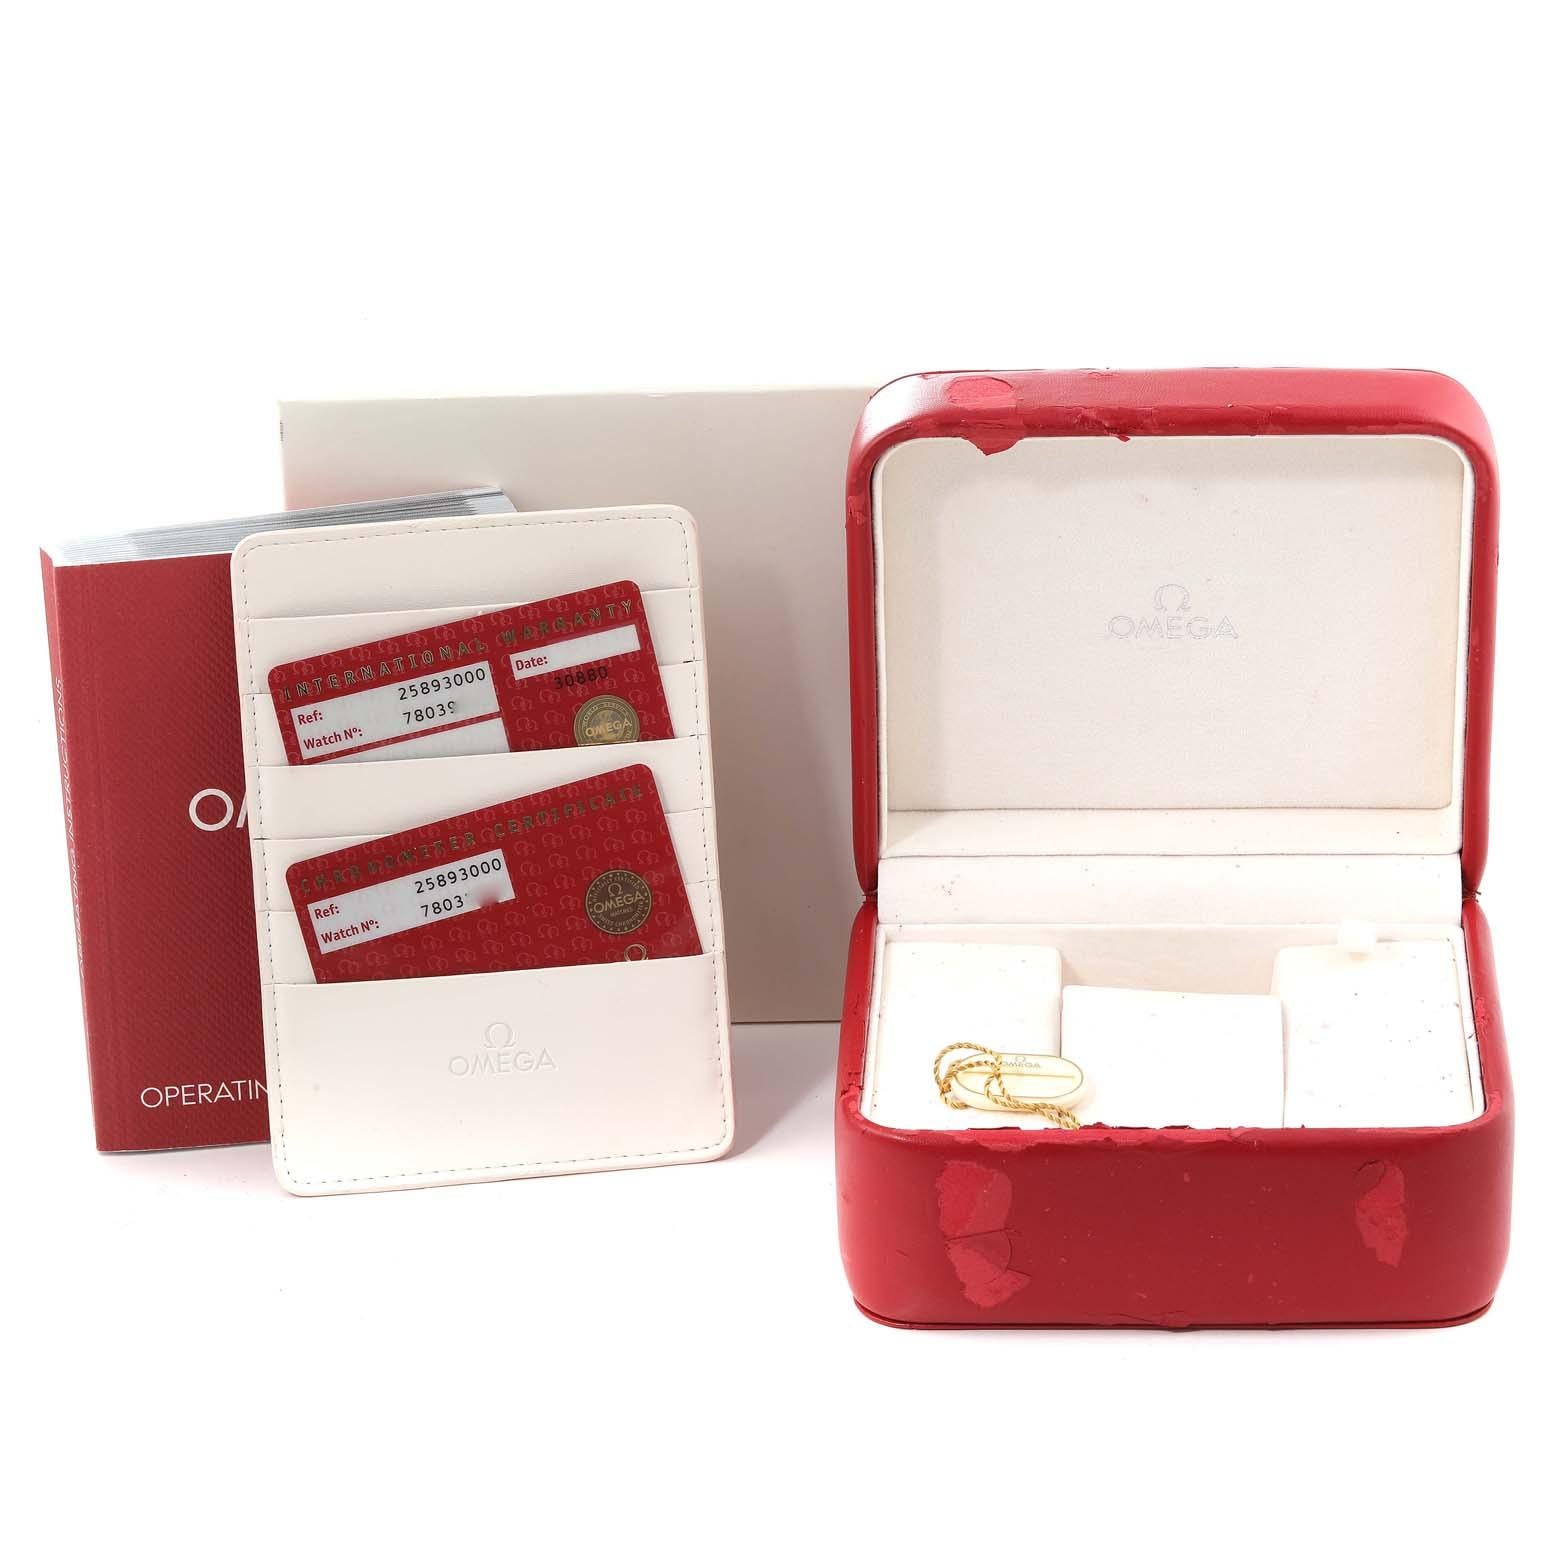 Omega Seamaster Special Edition Chronograph Watch 2589.30.00 Box Card For Sale 6